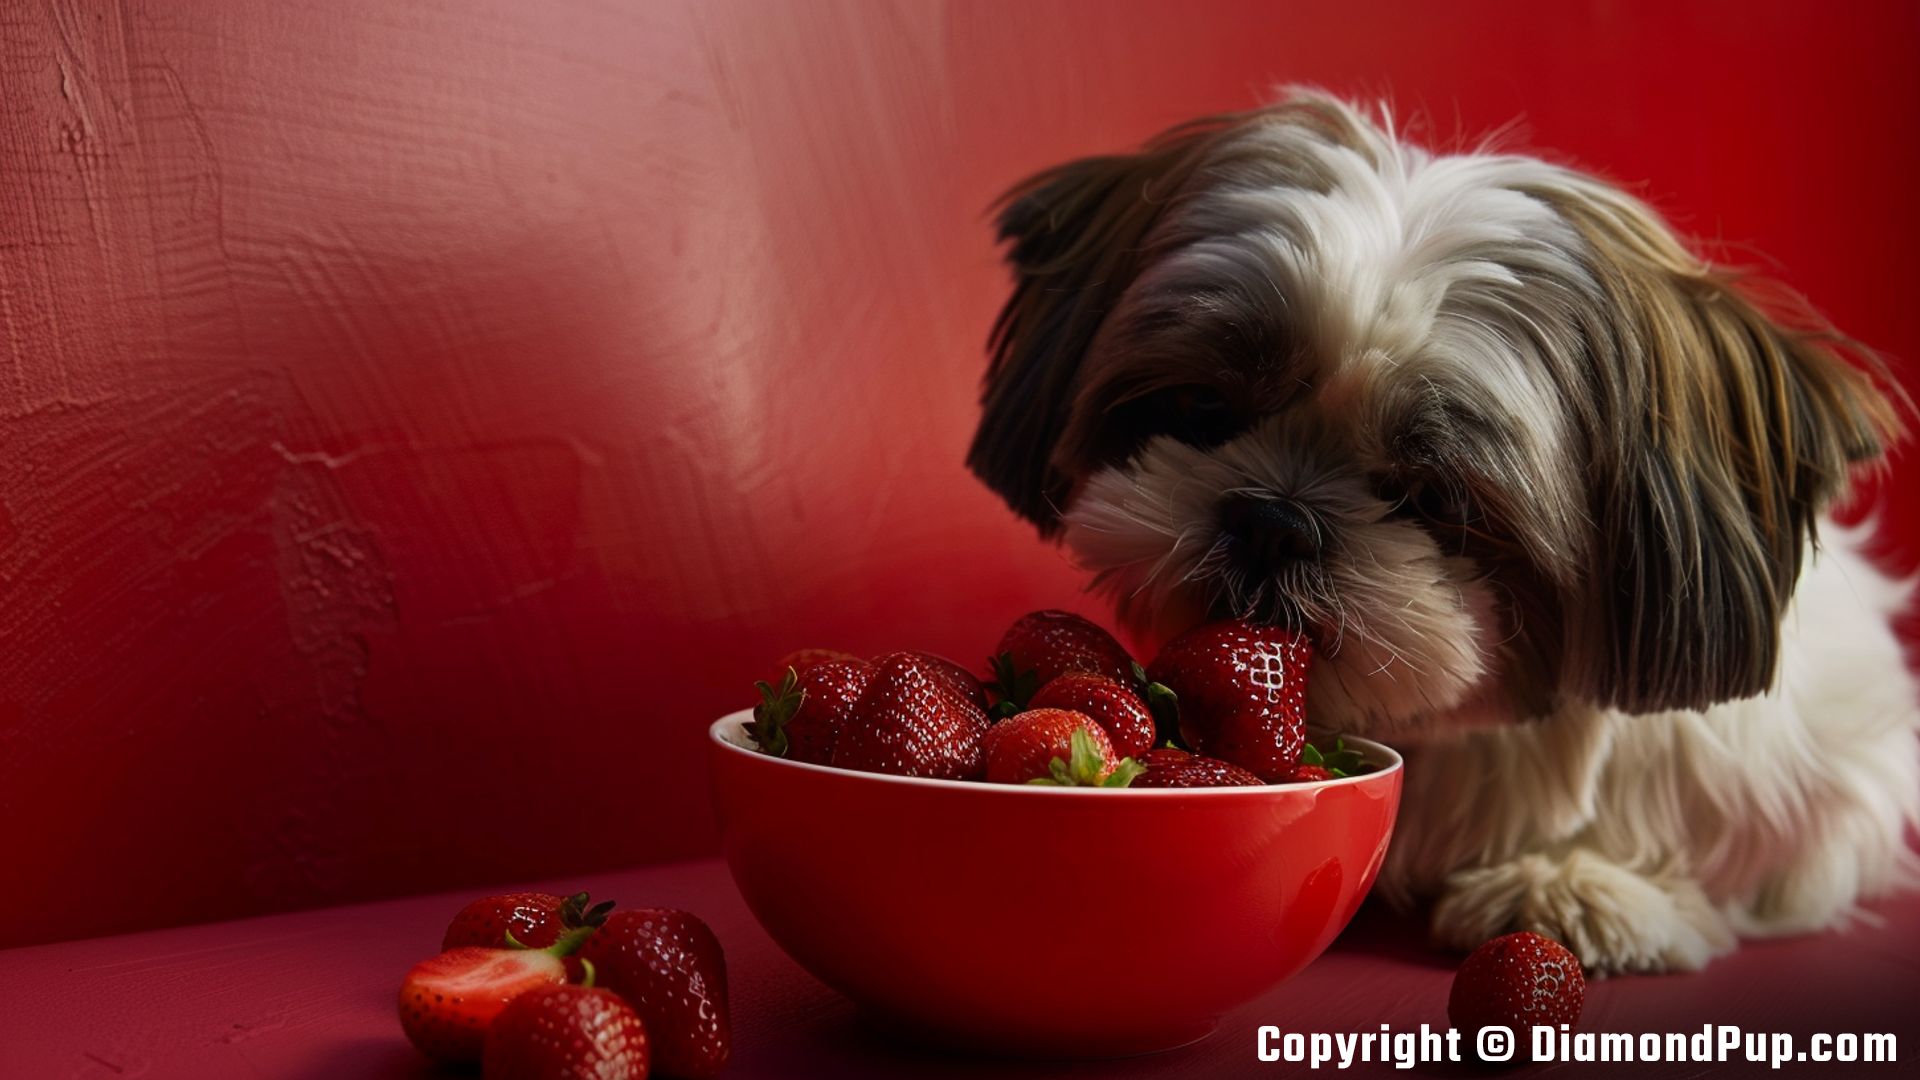 Image of a Playful Shih Tzu Snacking on Strawberries